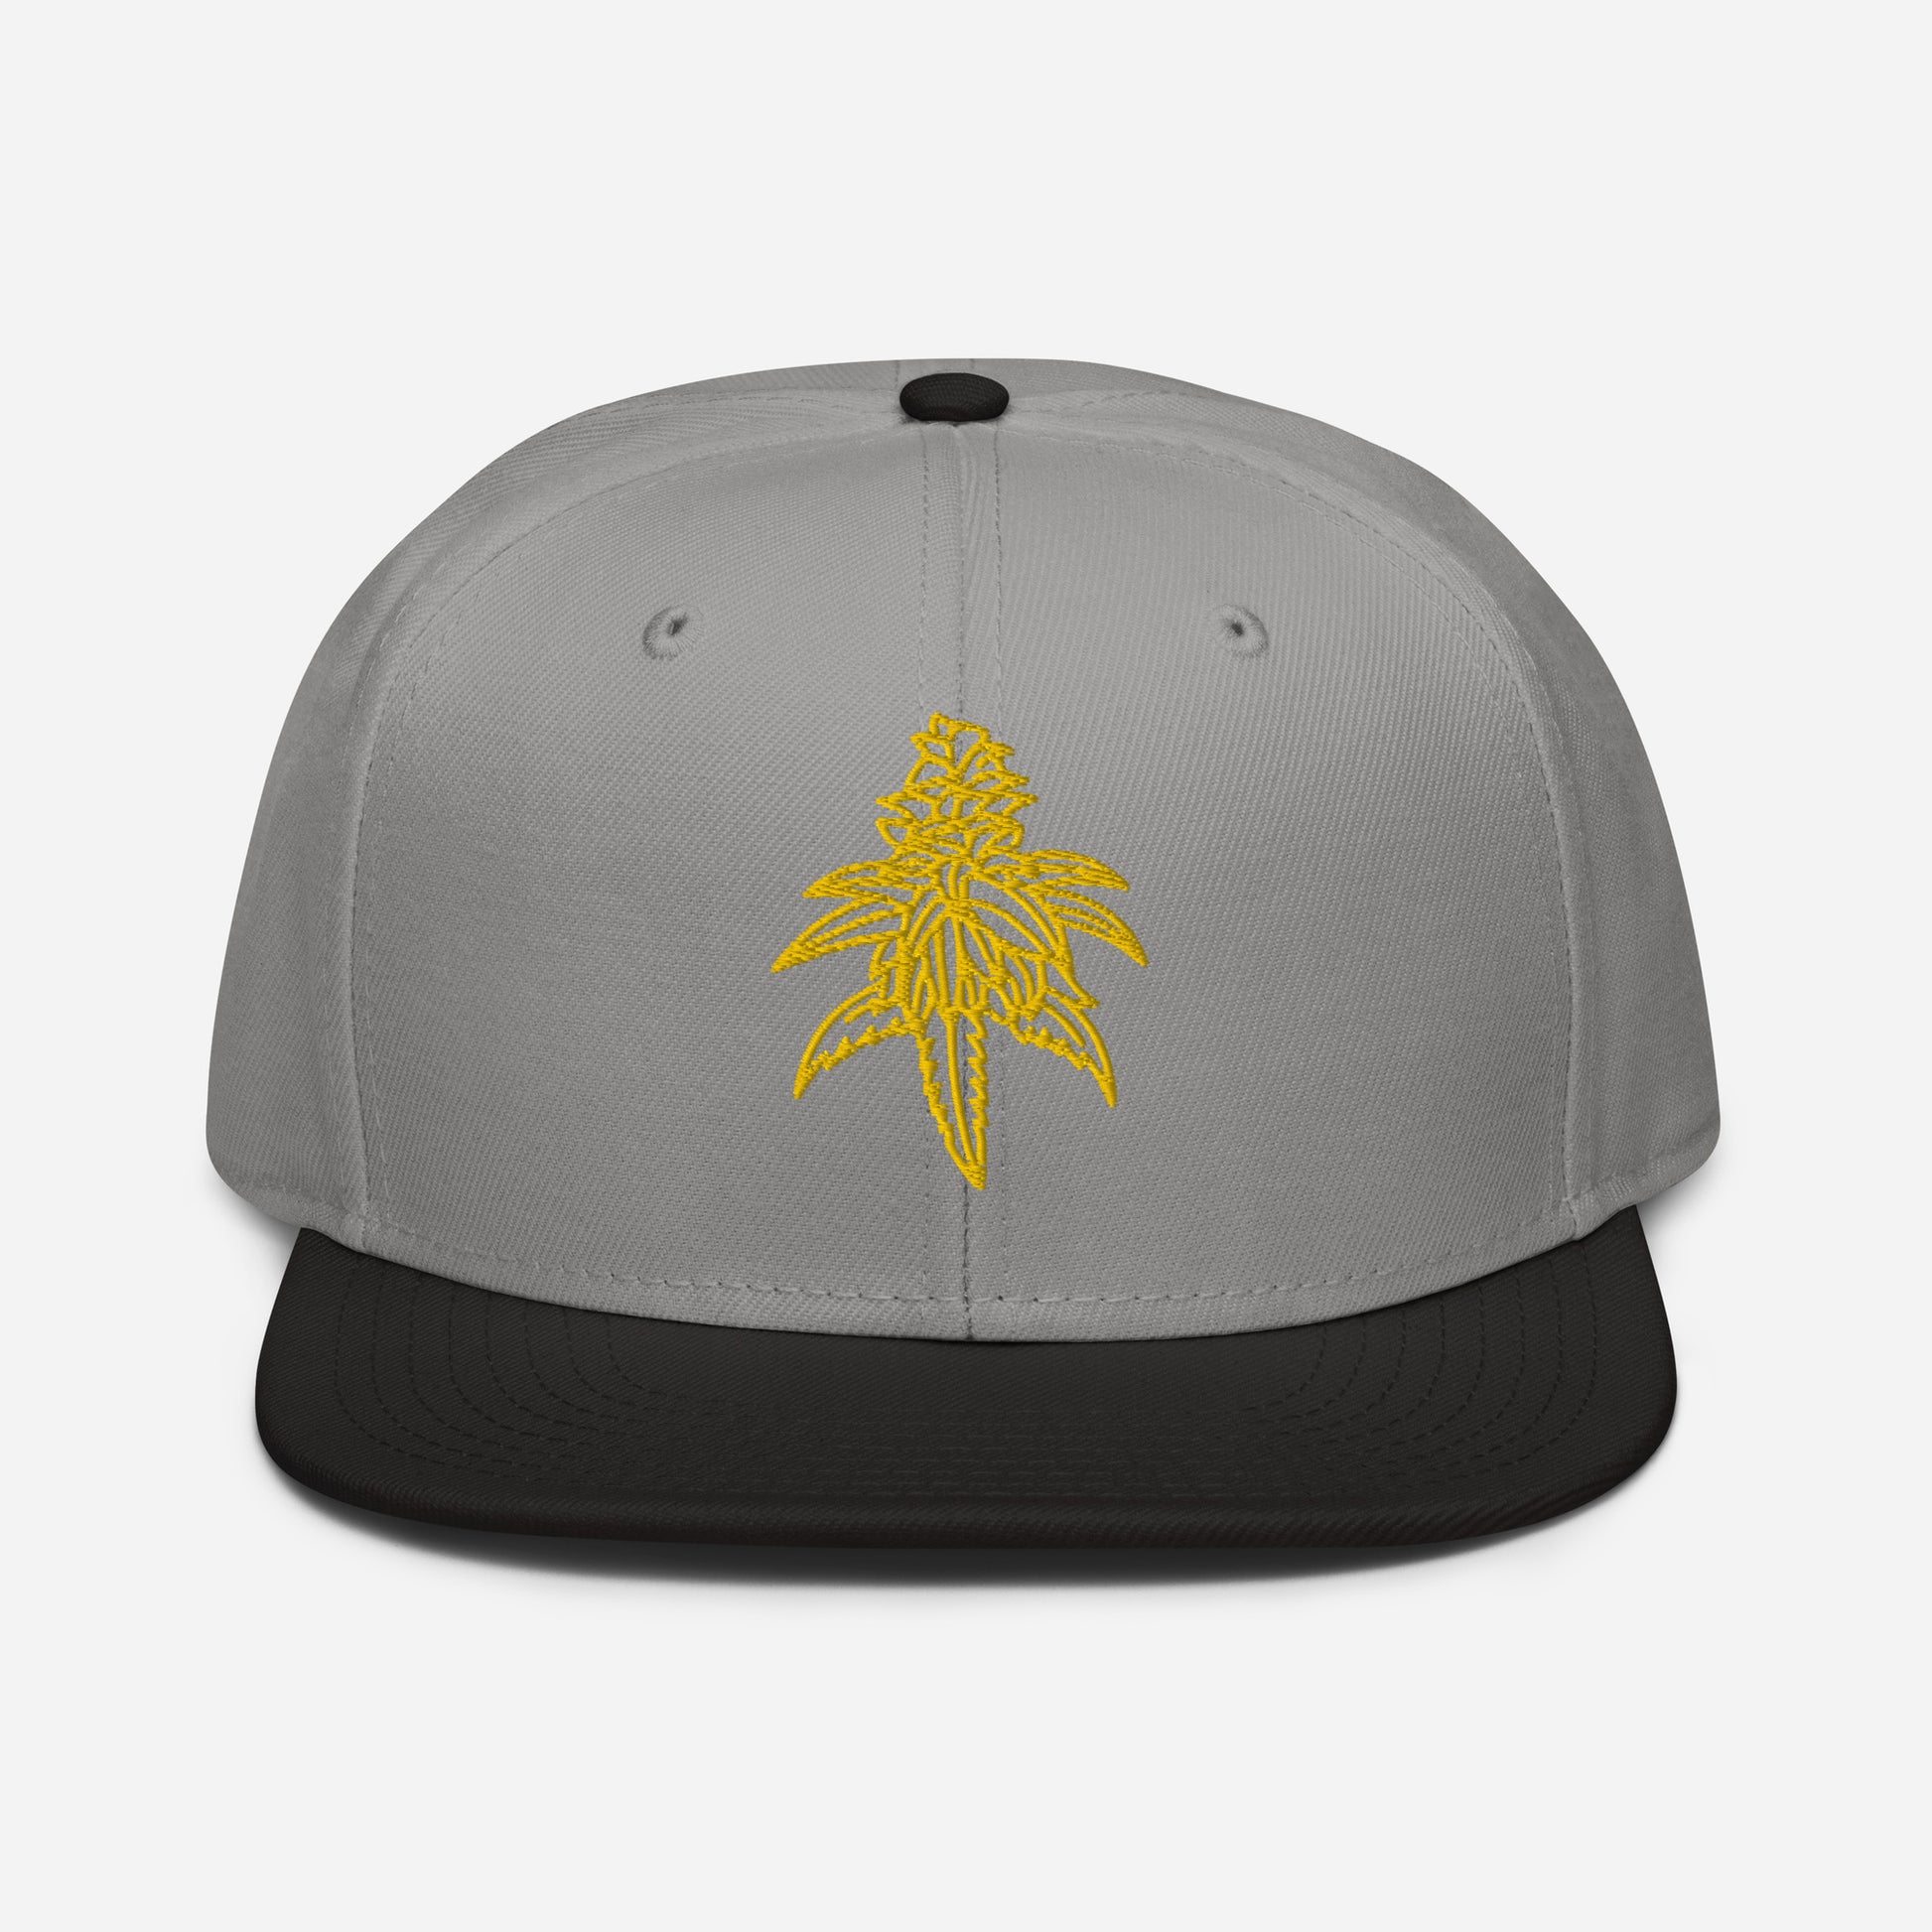 Golden Goat Cannabis high-profile snapback hat with a yellow embroidered design on the front.